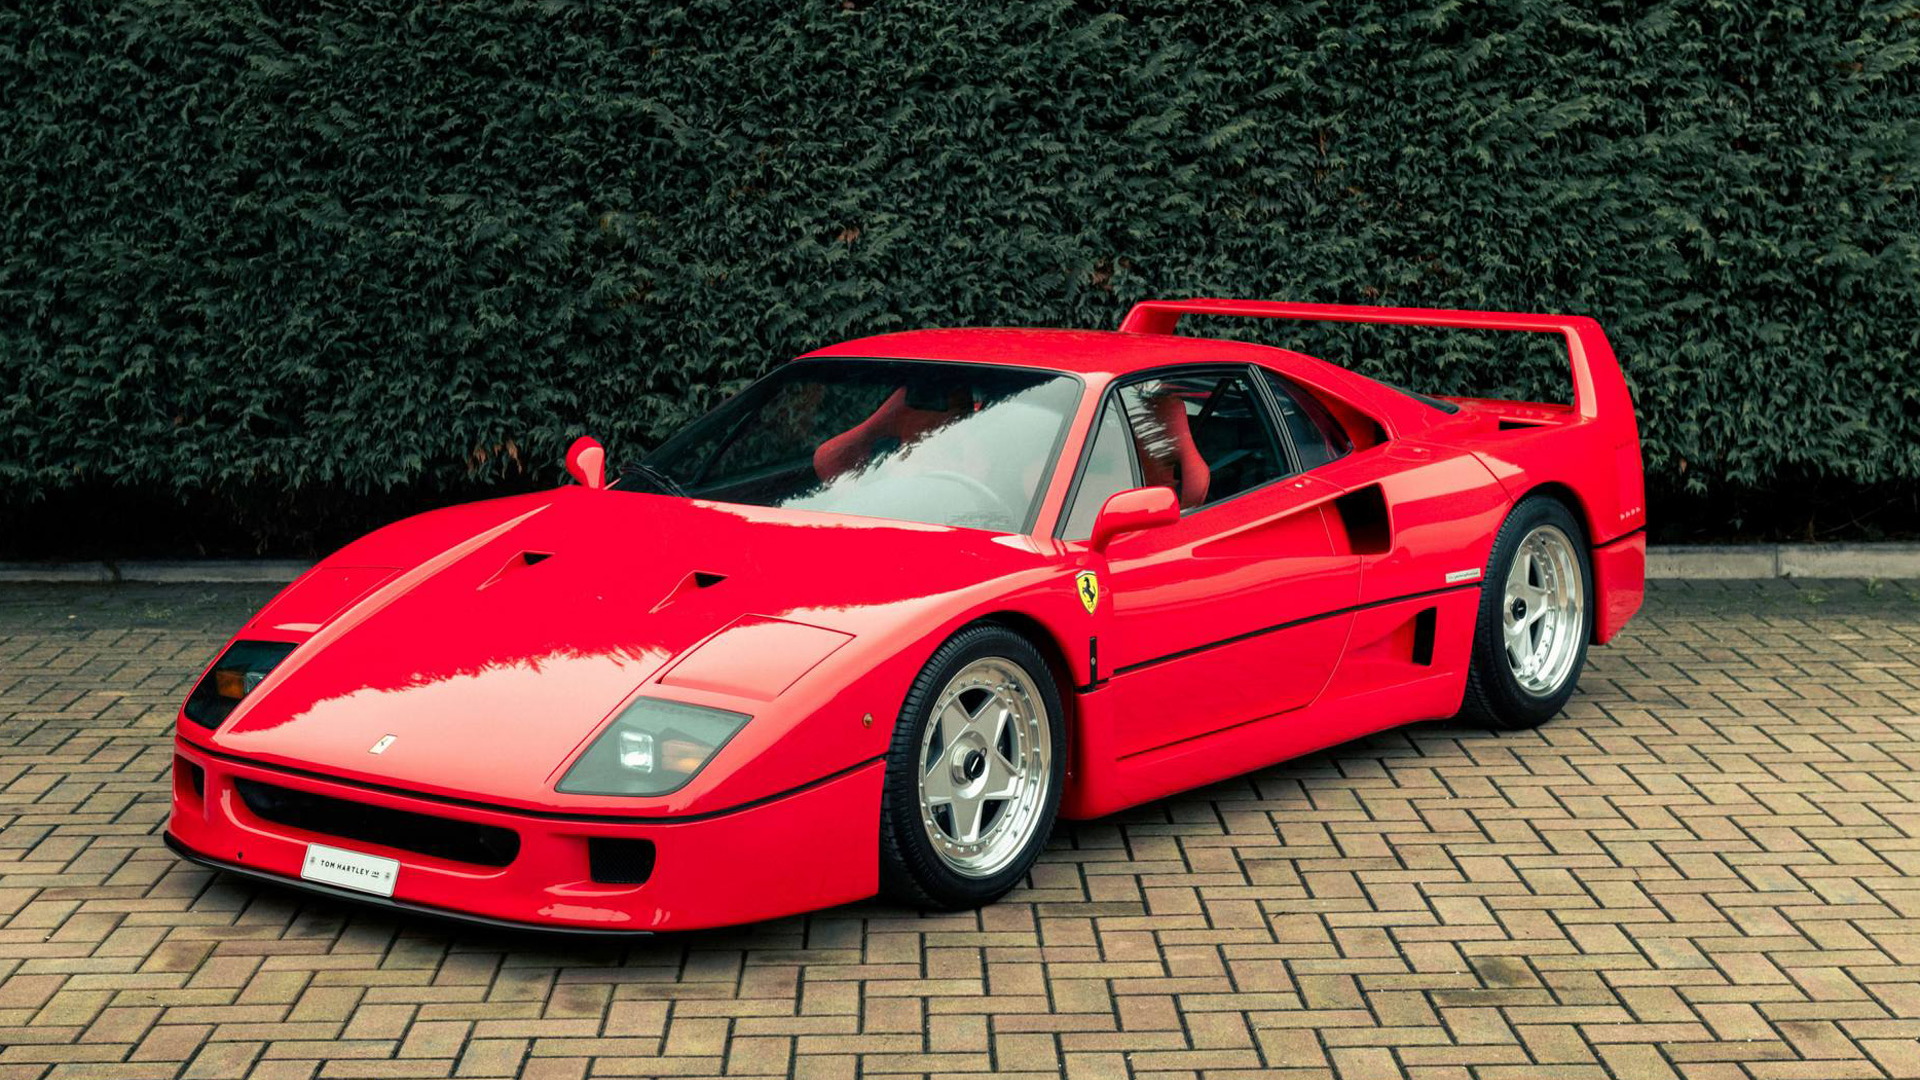 1990 Ferrari F40 previously owned by Toto Wolff - Photo credit: Tom Hartley Jnr.